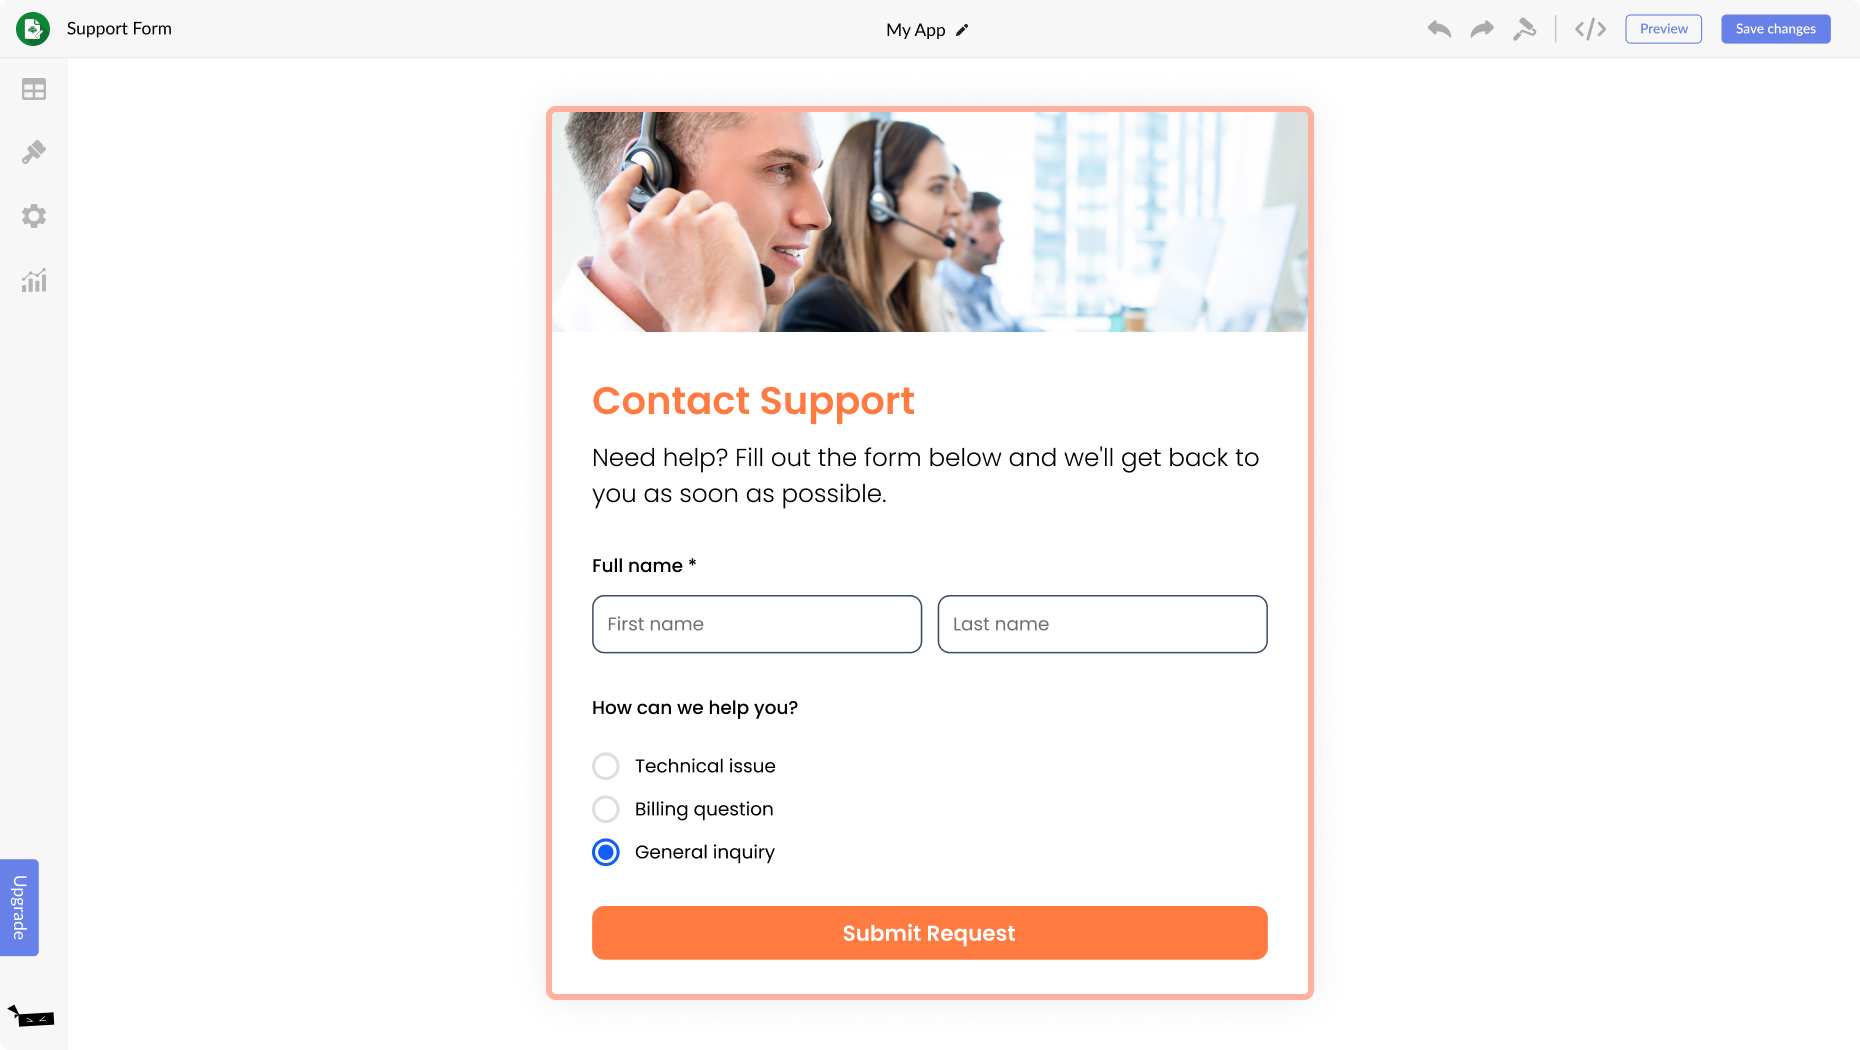 Support Form for Shopify